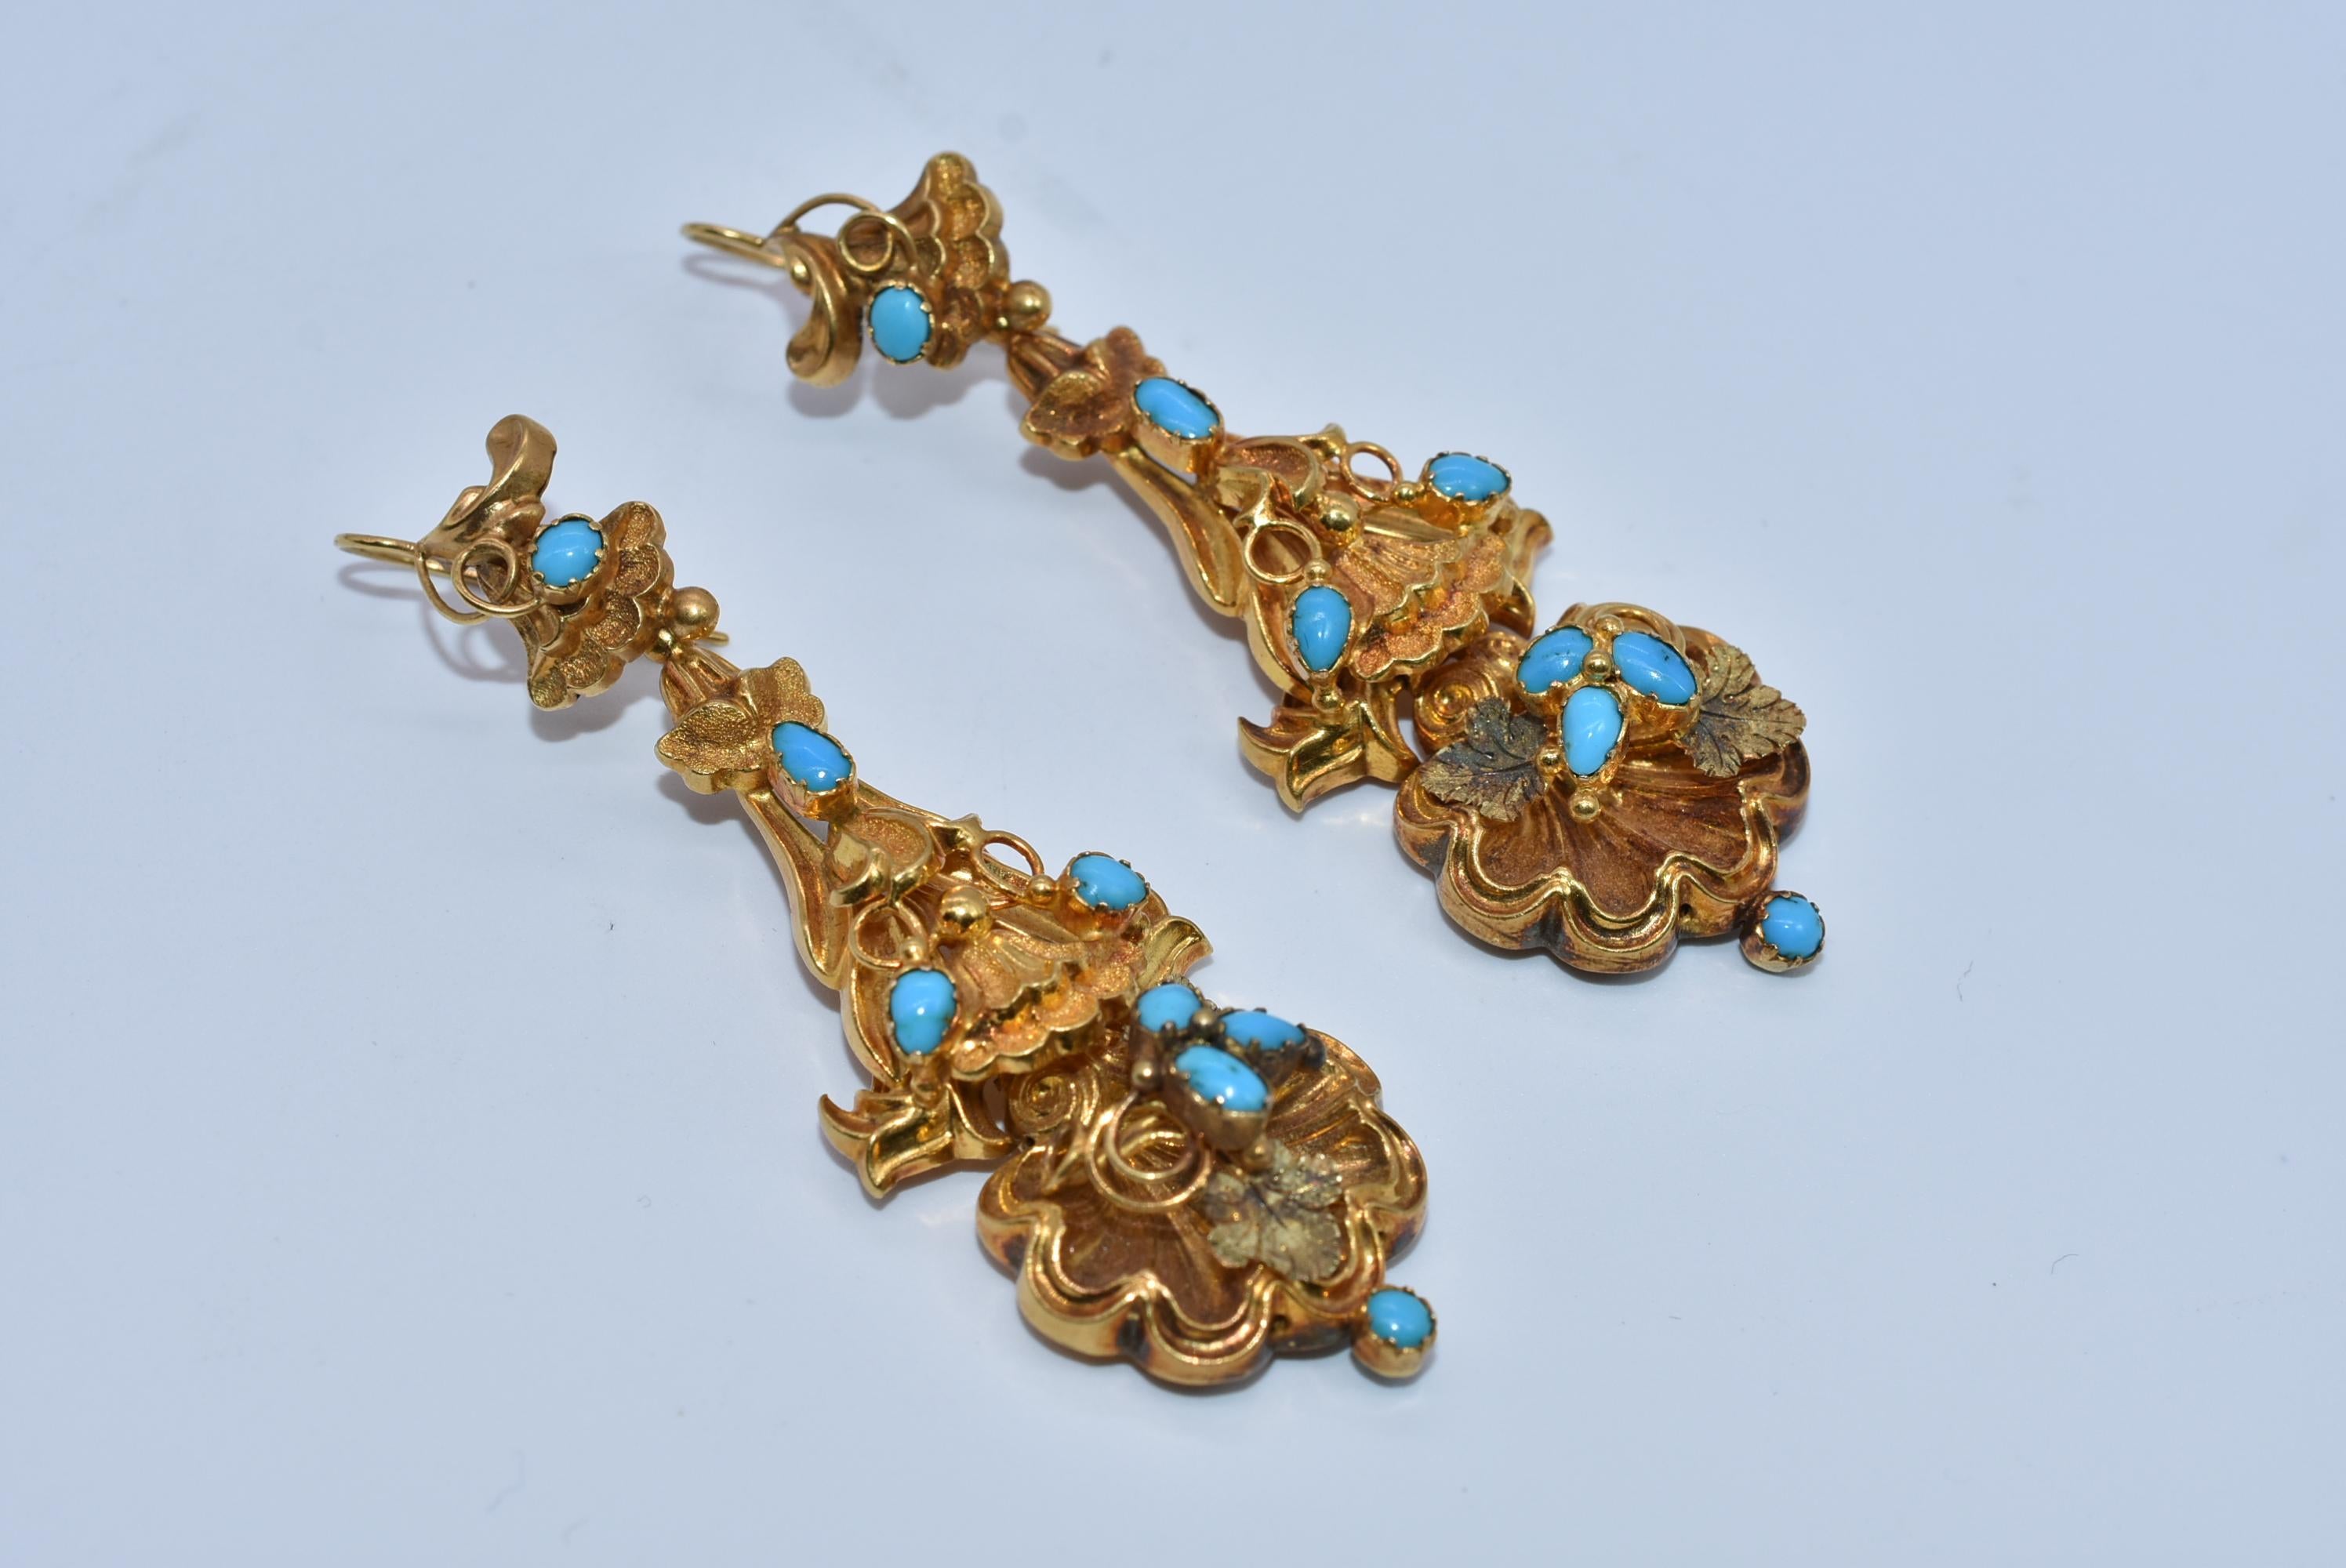 Three inch long day-night  gold earrings with a lovely rococo design that incorporates foliate and shell motifs set with Persian turquoise and enlivened by the two-color 15K gold. The earrings have a secure hook on the back of the drop part of the